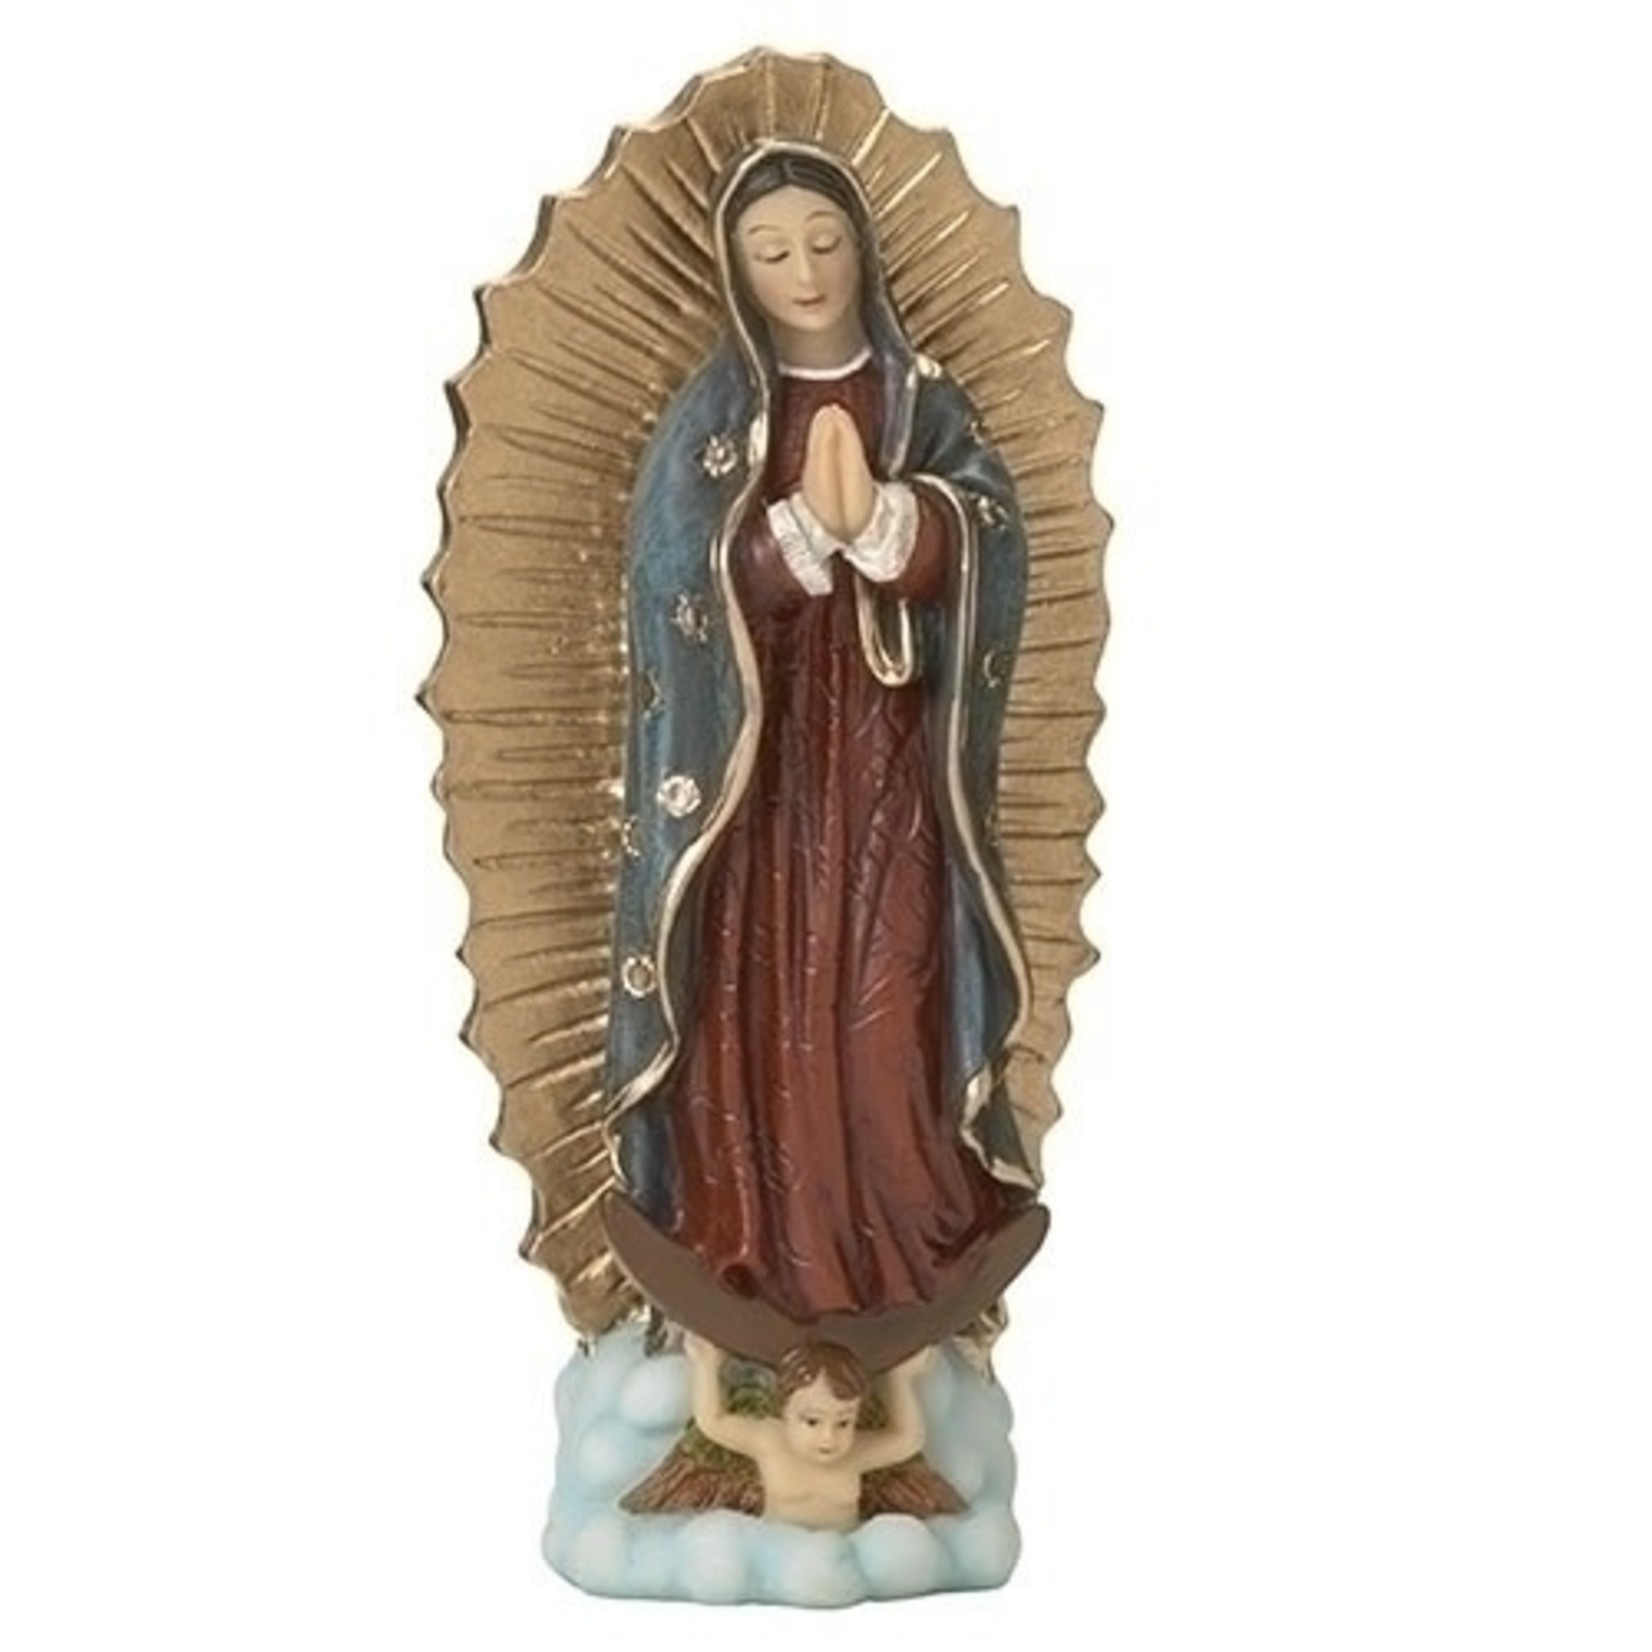 Our Lady of Guadalupe Patron Saint Statue